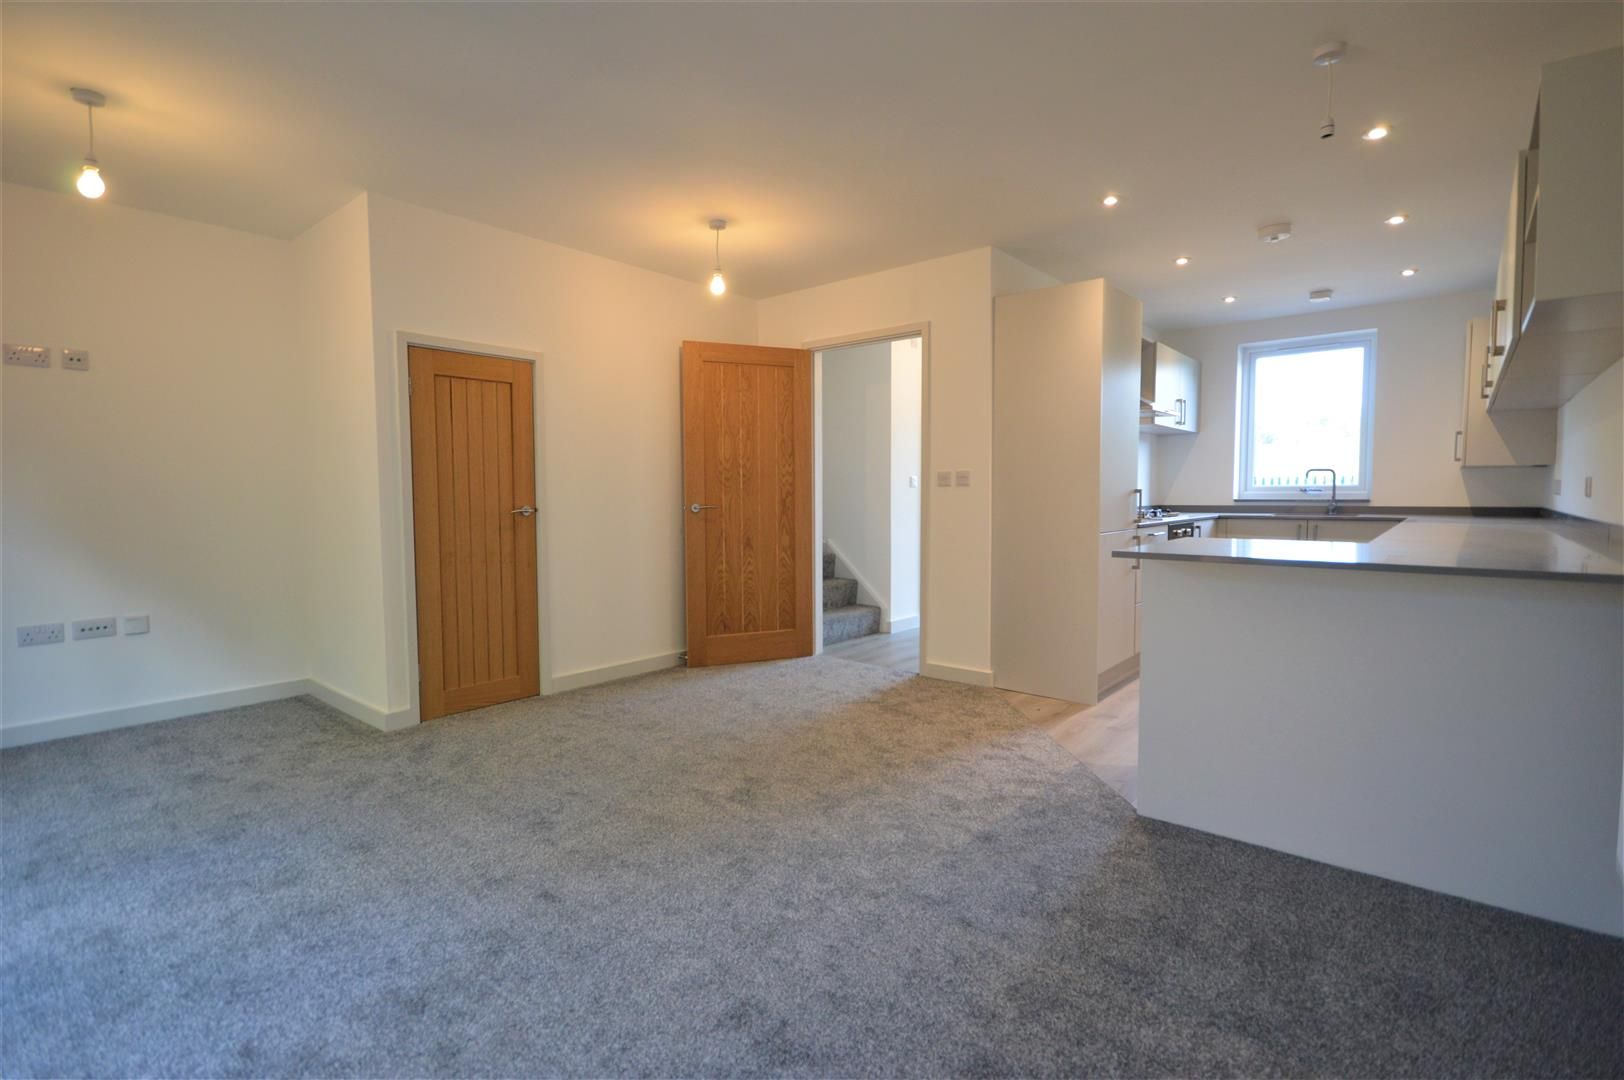 2 bed terraced for sale in Leominster  - Property Image 2